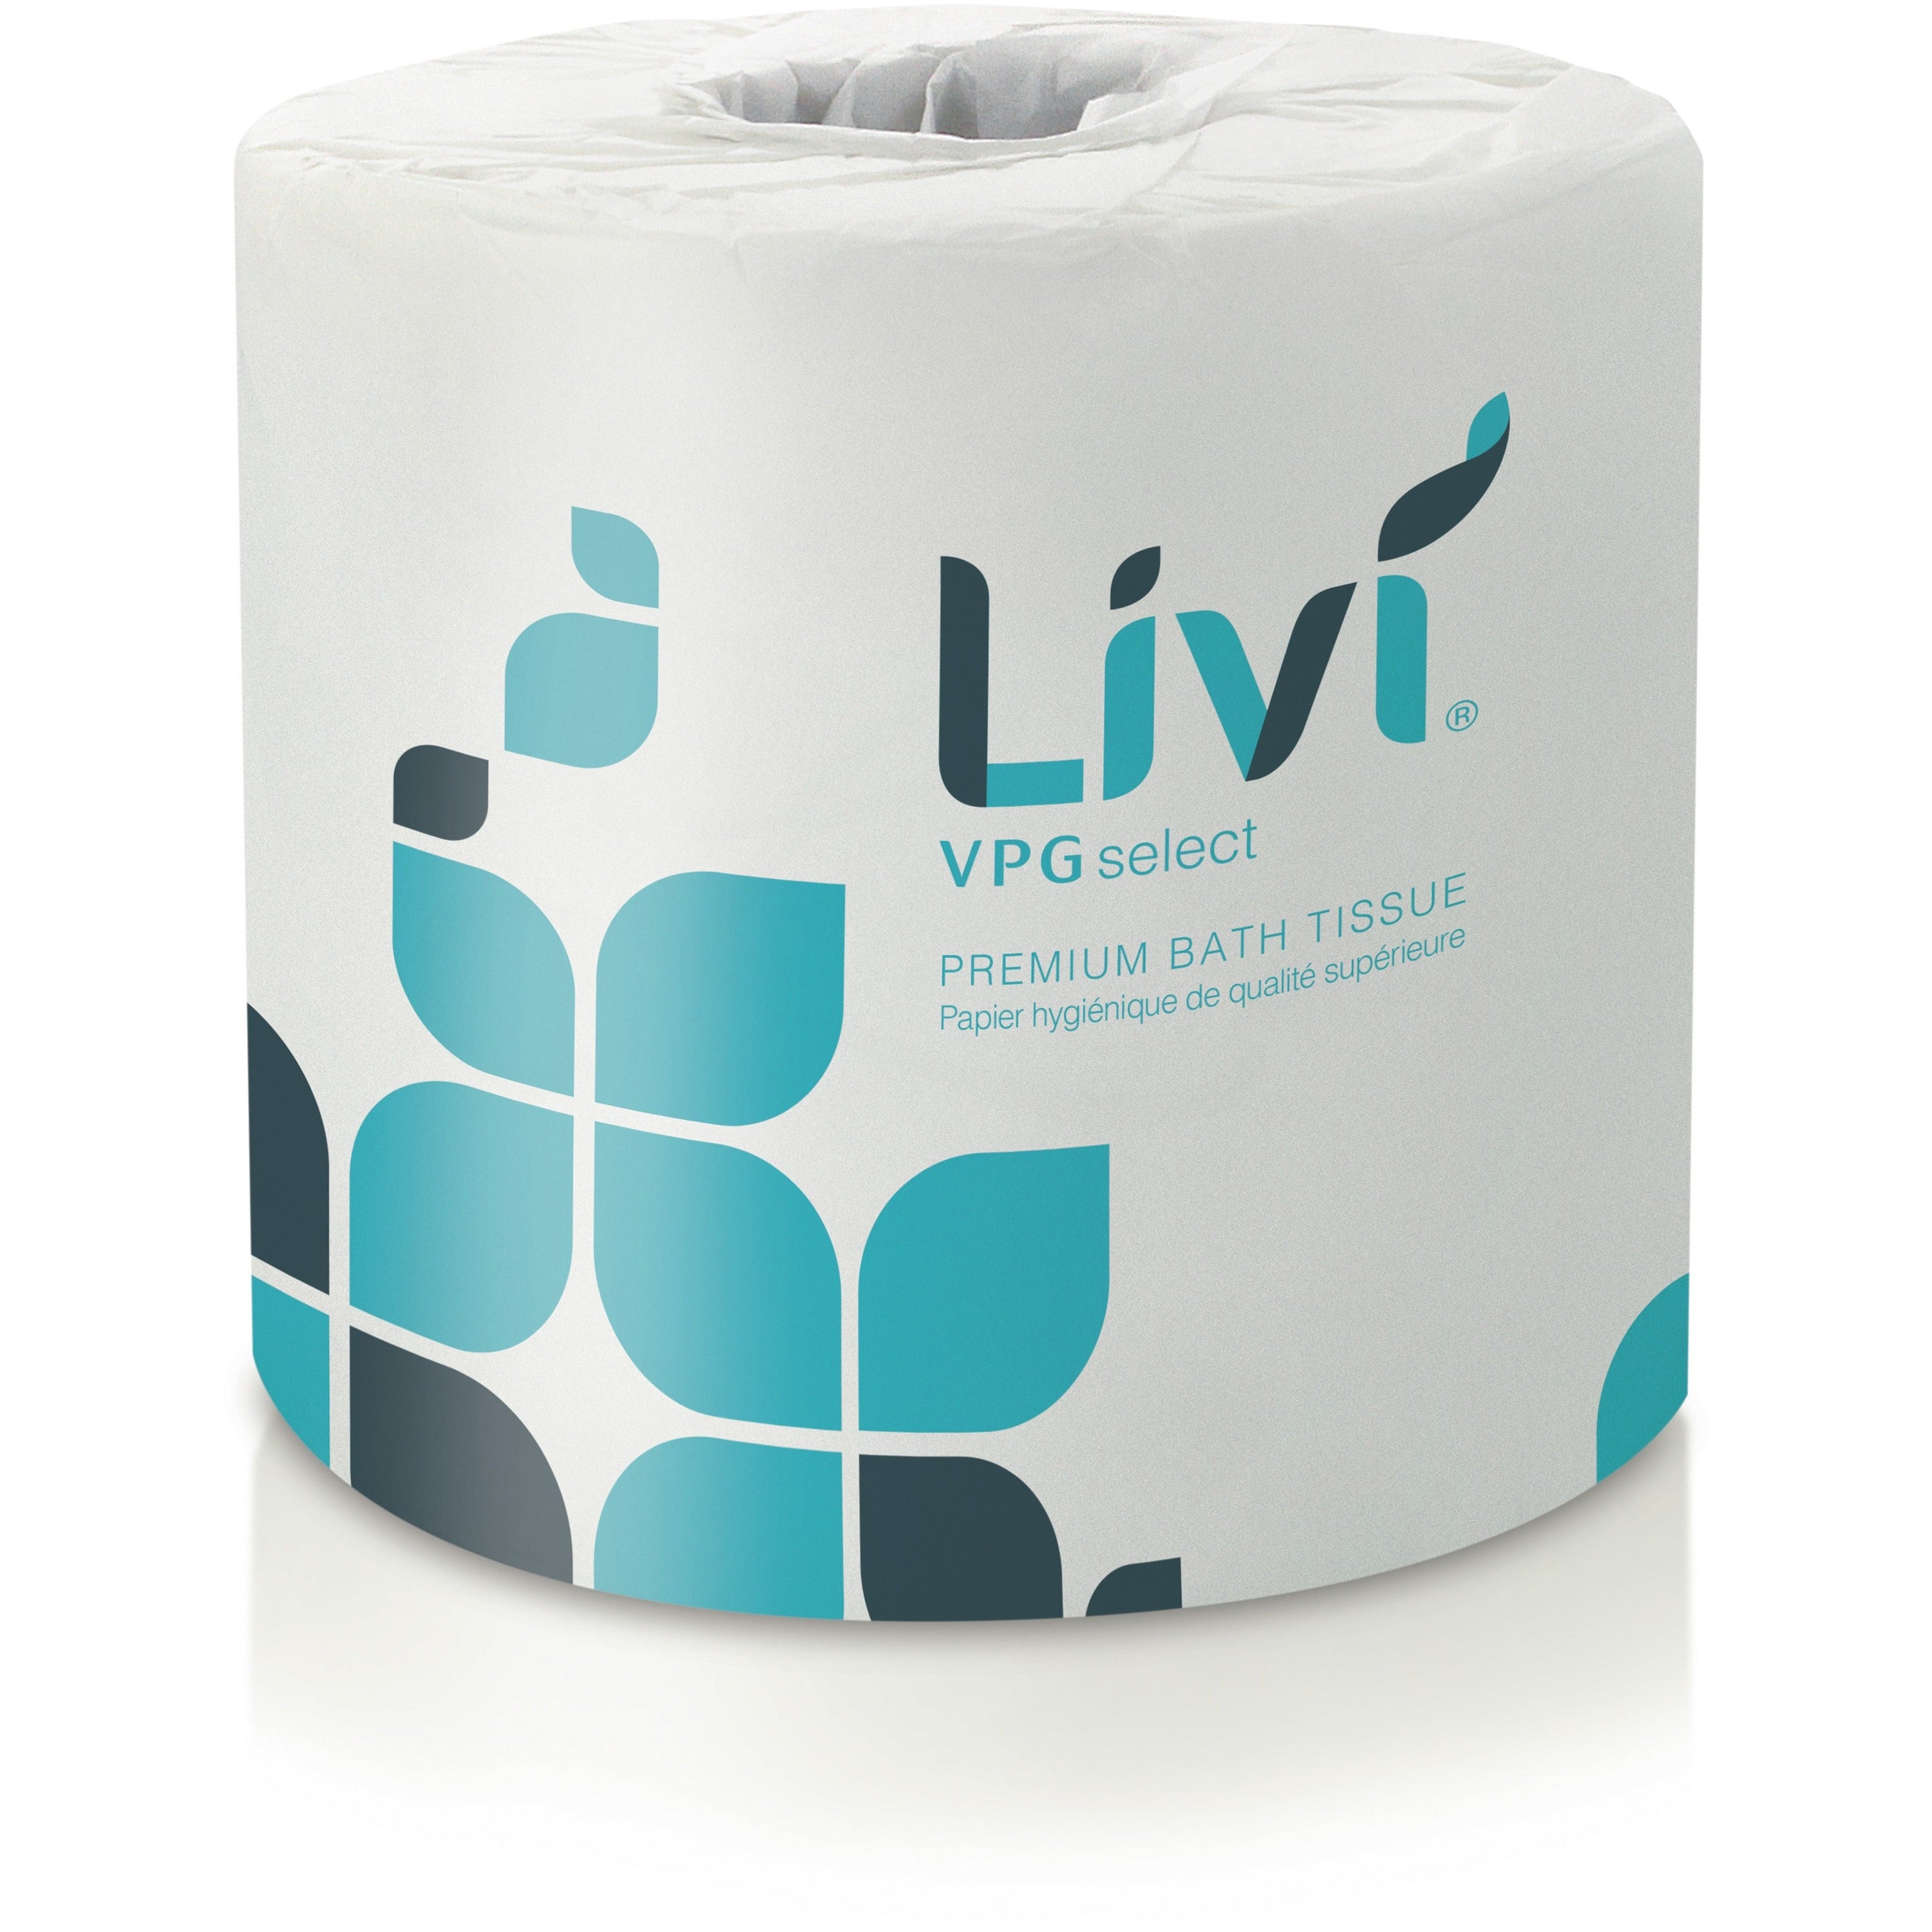 livi-vpg-select-bath-tissue-2-ply-375-x-406-500-sheets-roll-177-core-white-fiber-embossed-soft-absorbent-eco-friendly-for-bathroom-office-building-restroom-industry-80-carton_sol21547 - 1